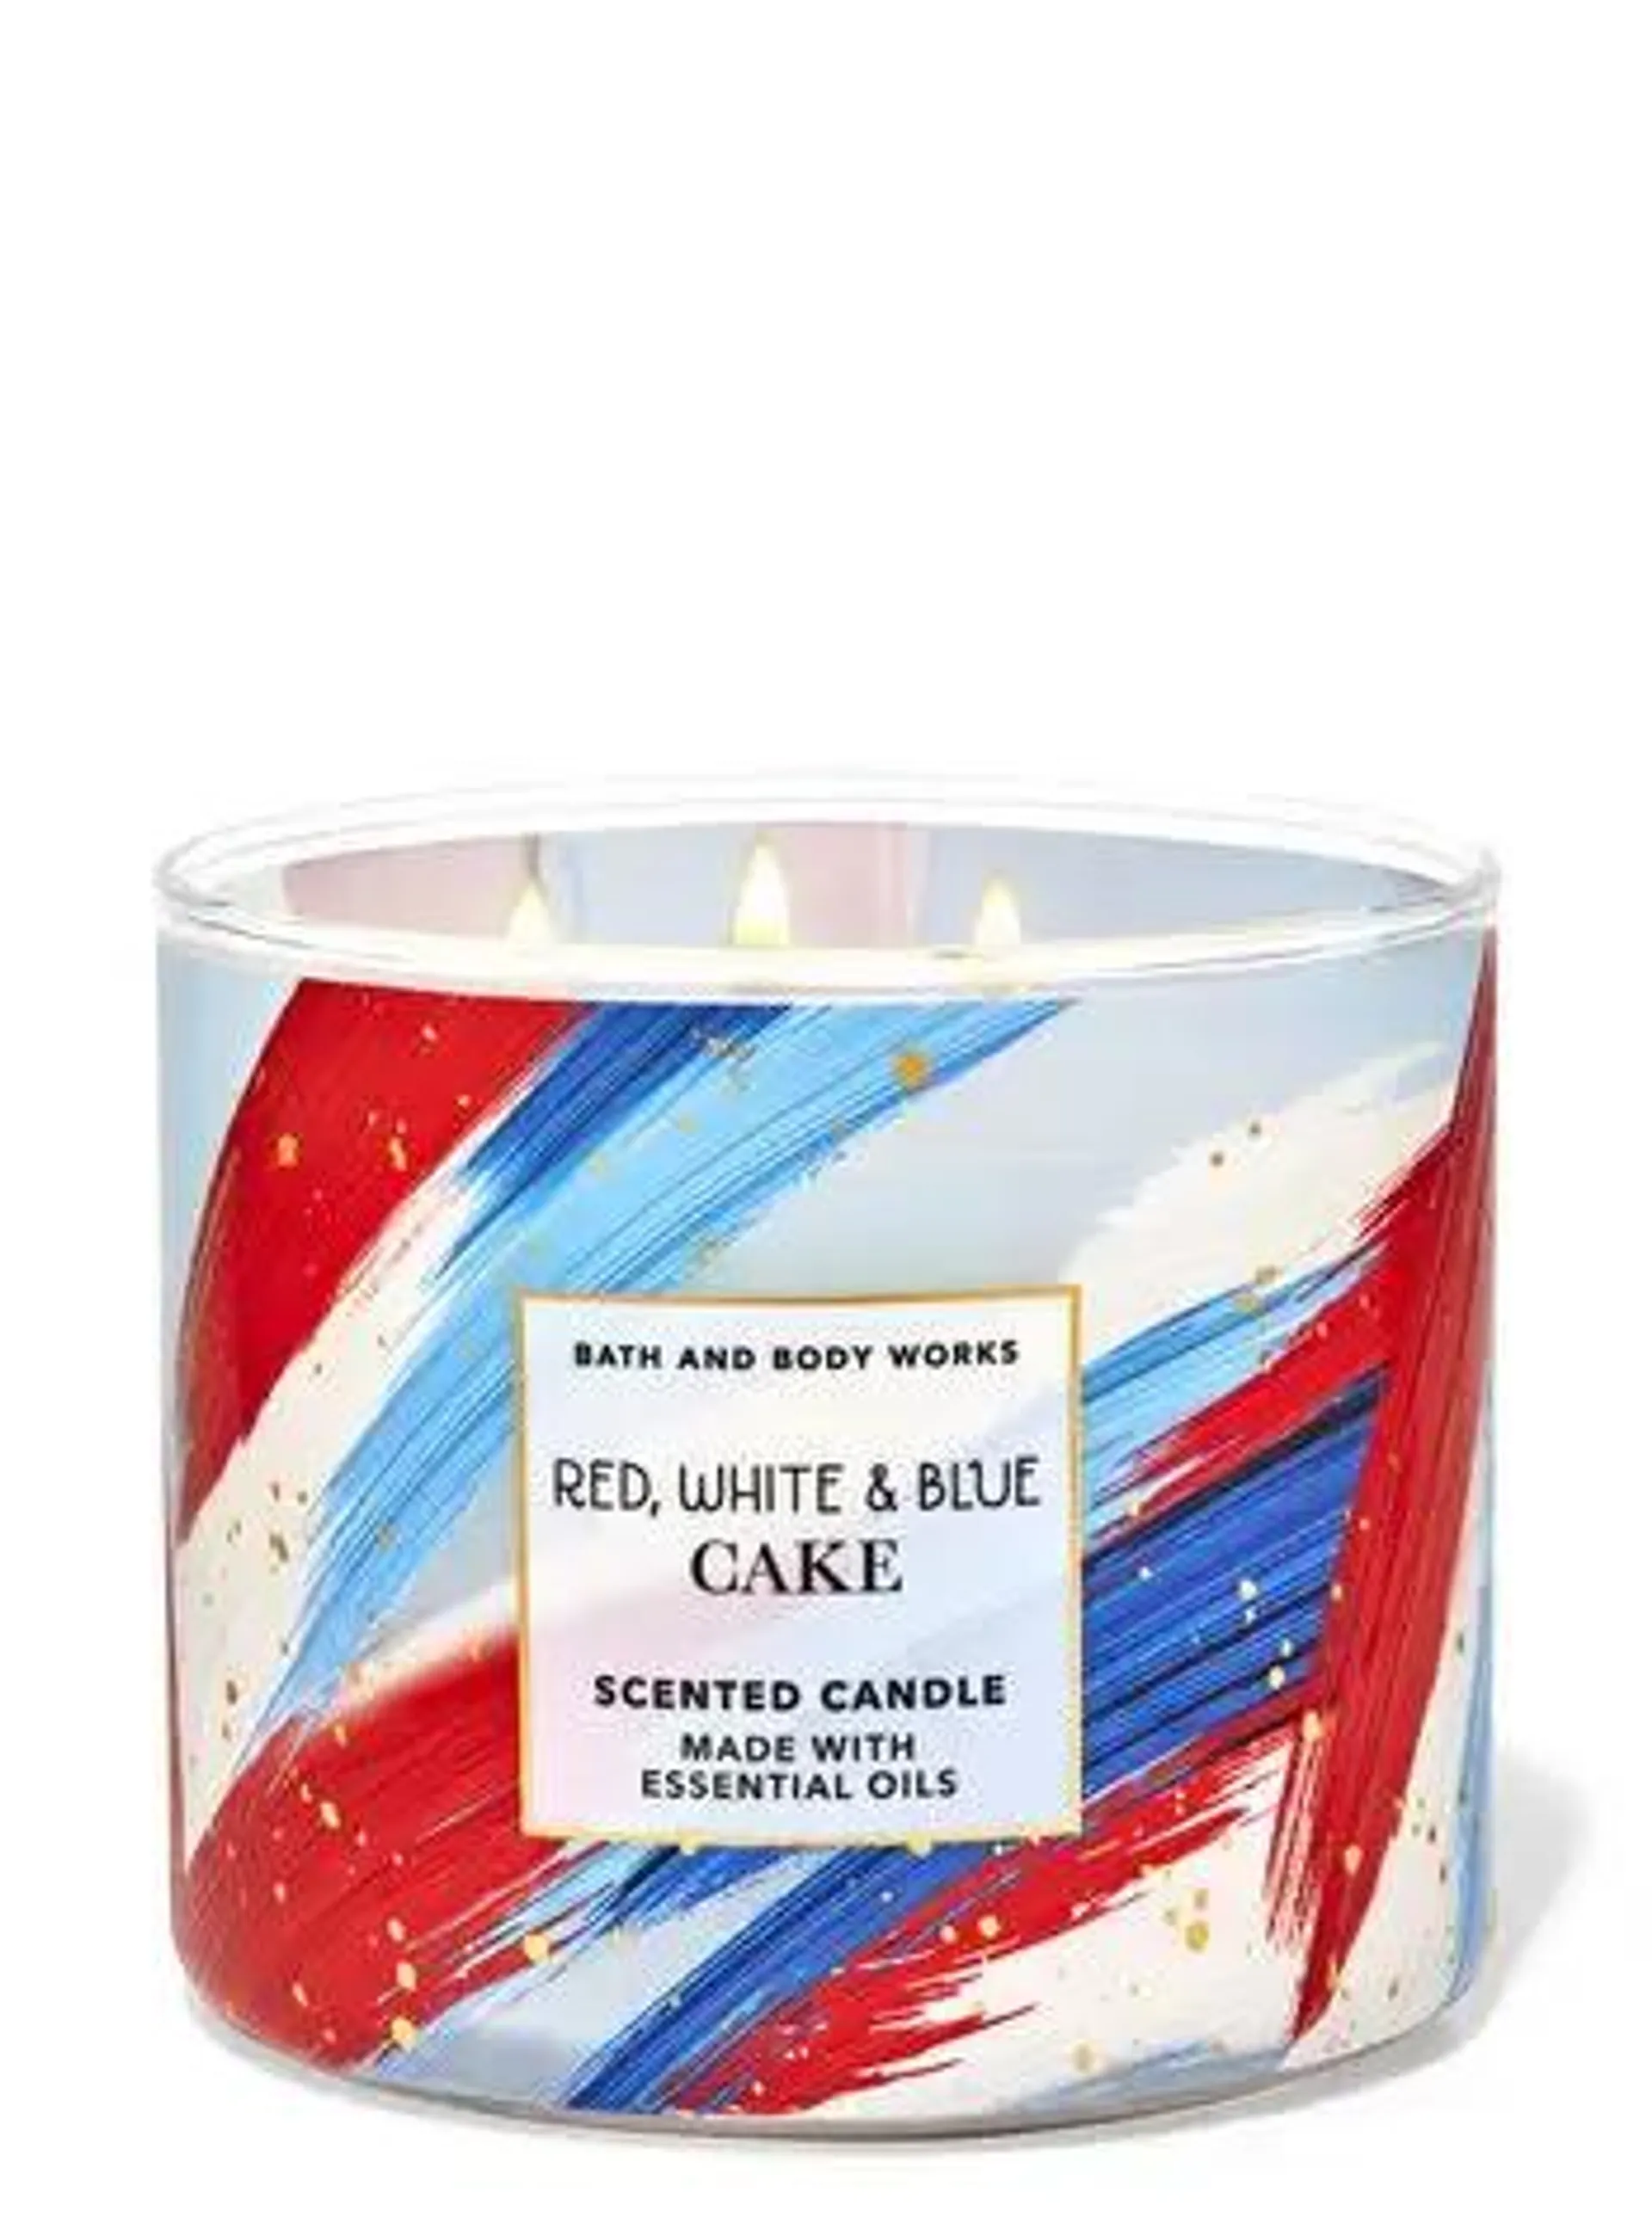 Red, White & Blue Cake 3-Wick Candle